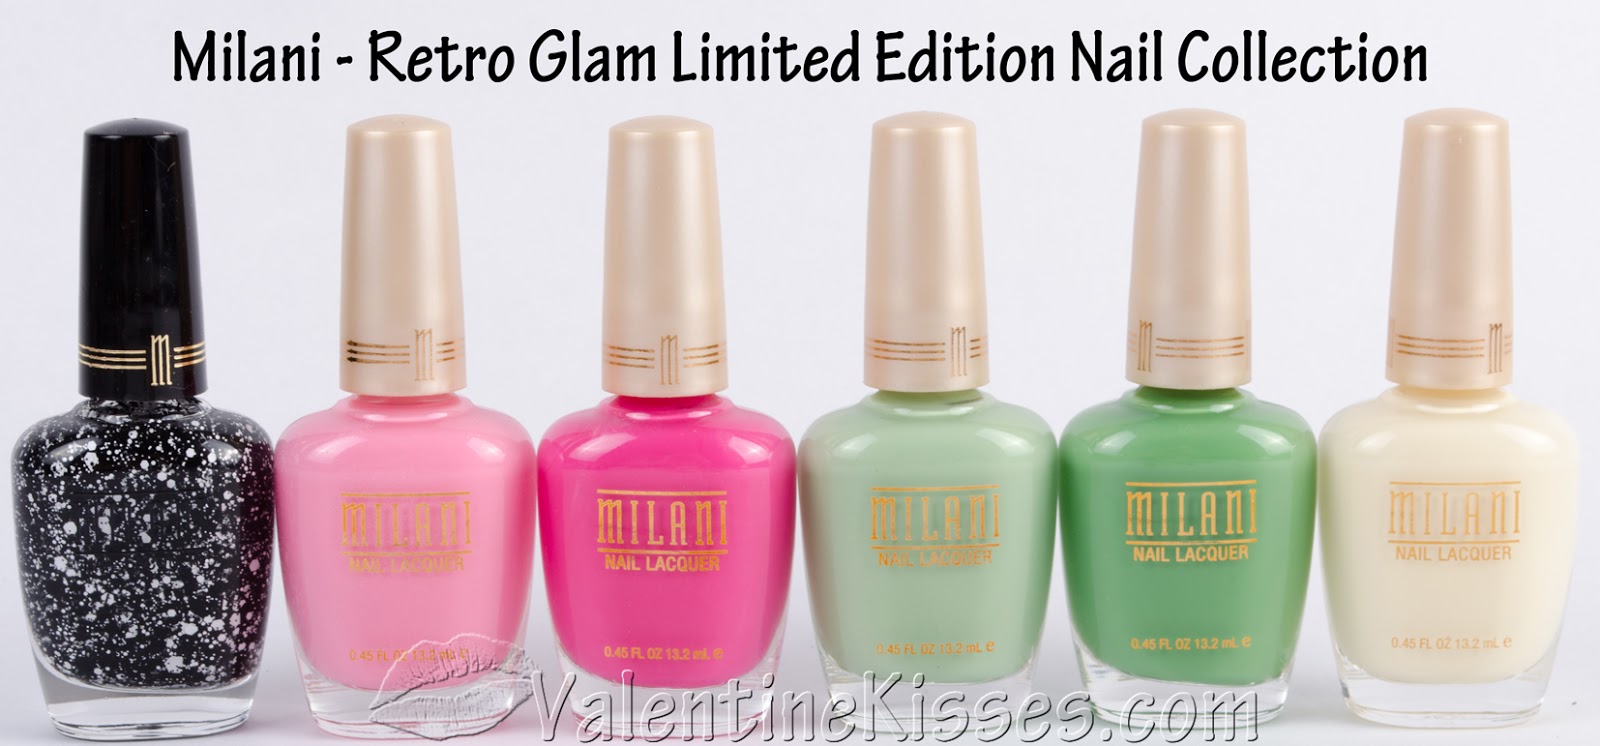 Valentine Kisses: Milani Retro Glam Limited Edition Collection - 6 shades - pics, swatches,